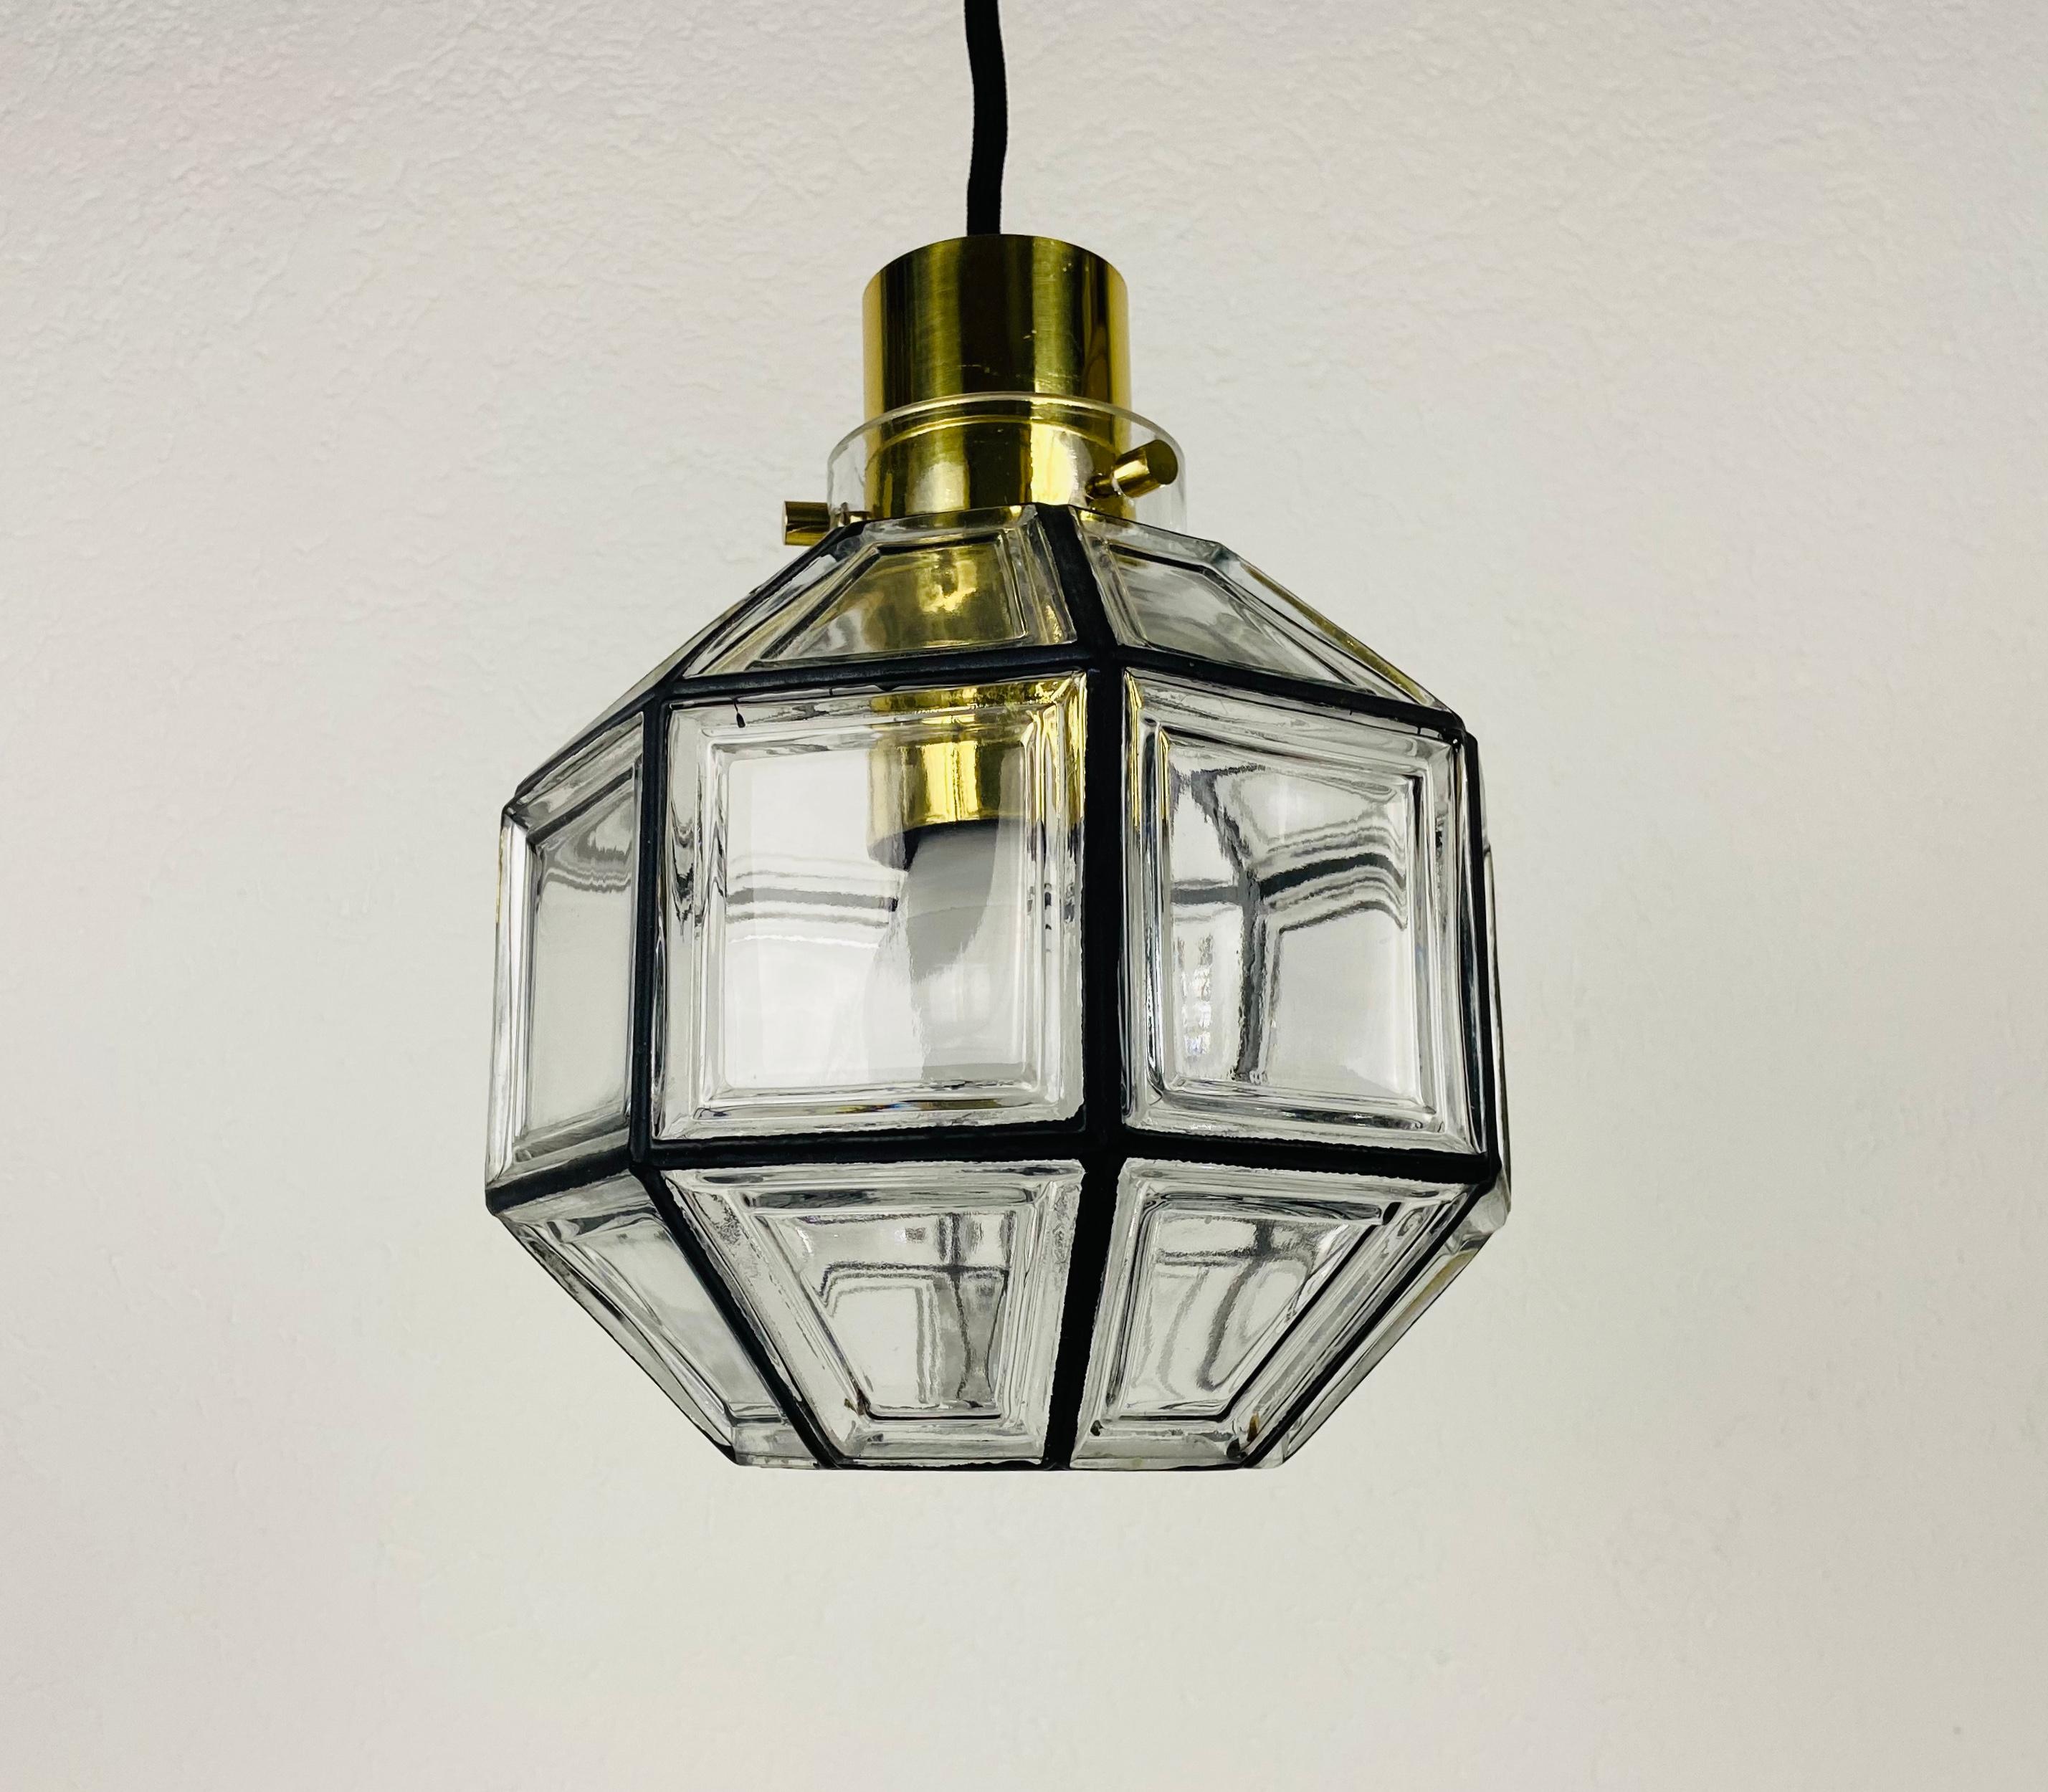 A Mid-Century Modern flush mount by Glashütte Limburg made in the 1960s in Germany. It is fascinating with its beautiful shape and bubble glass. The fixture has a very nice Minimalist design.

The light requires one E27 (US E26) light bulb. Works